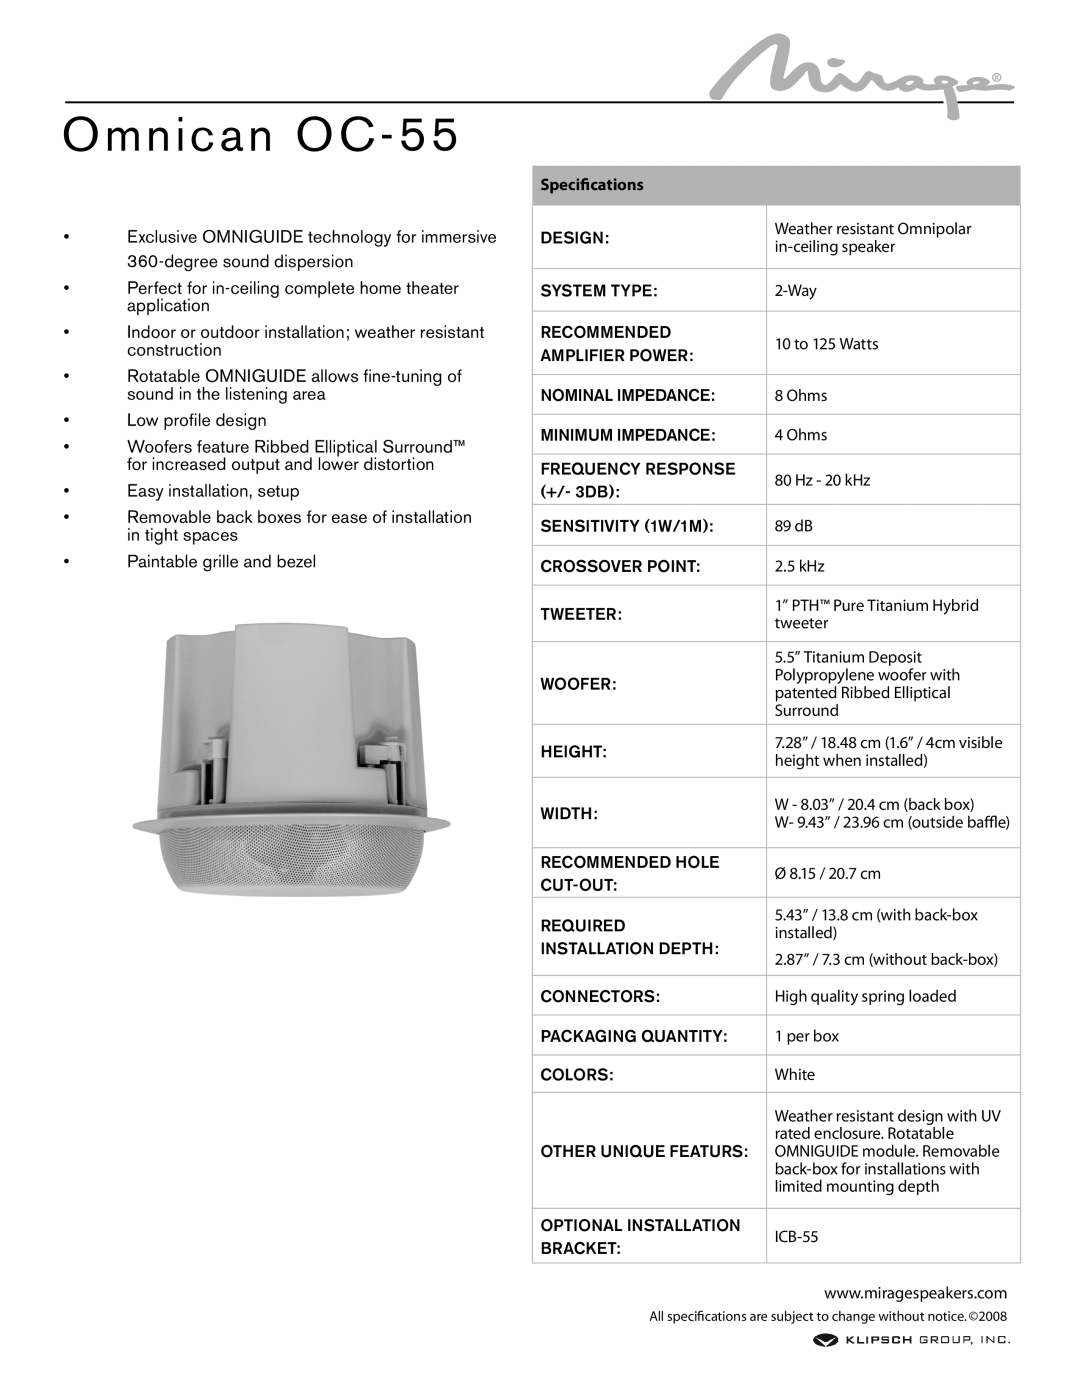 Mirage Loudspeakers OC-55 specifications Omnican OC, Specifications 